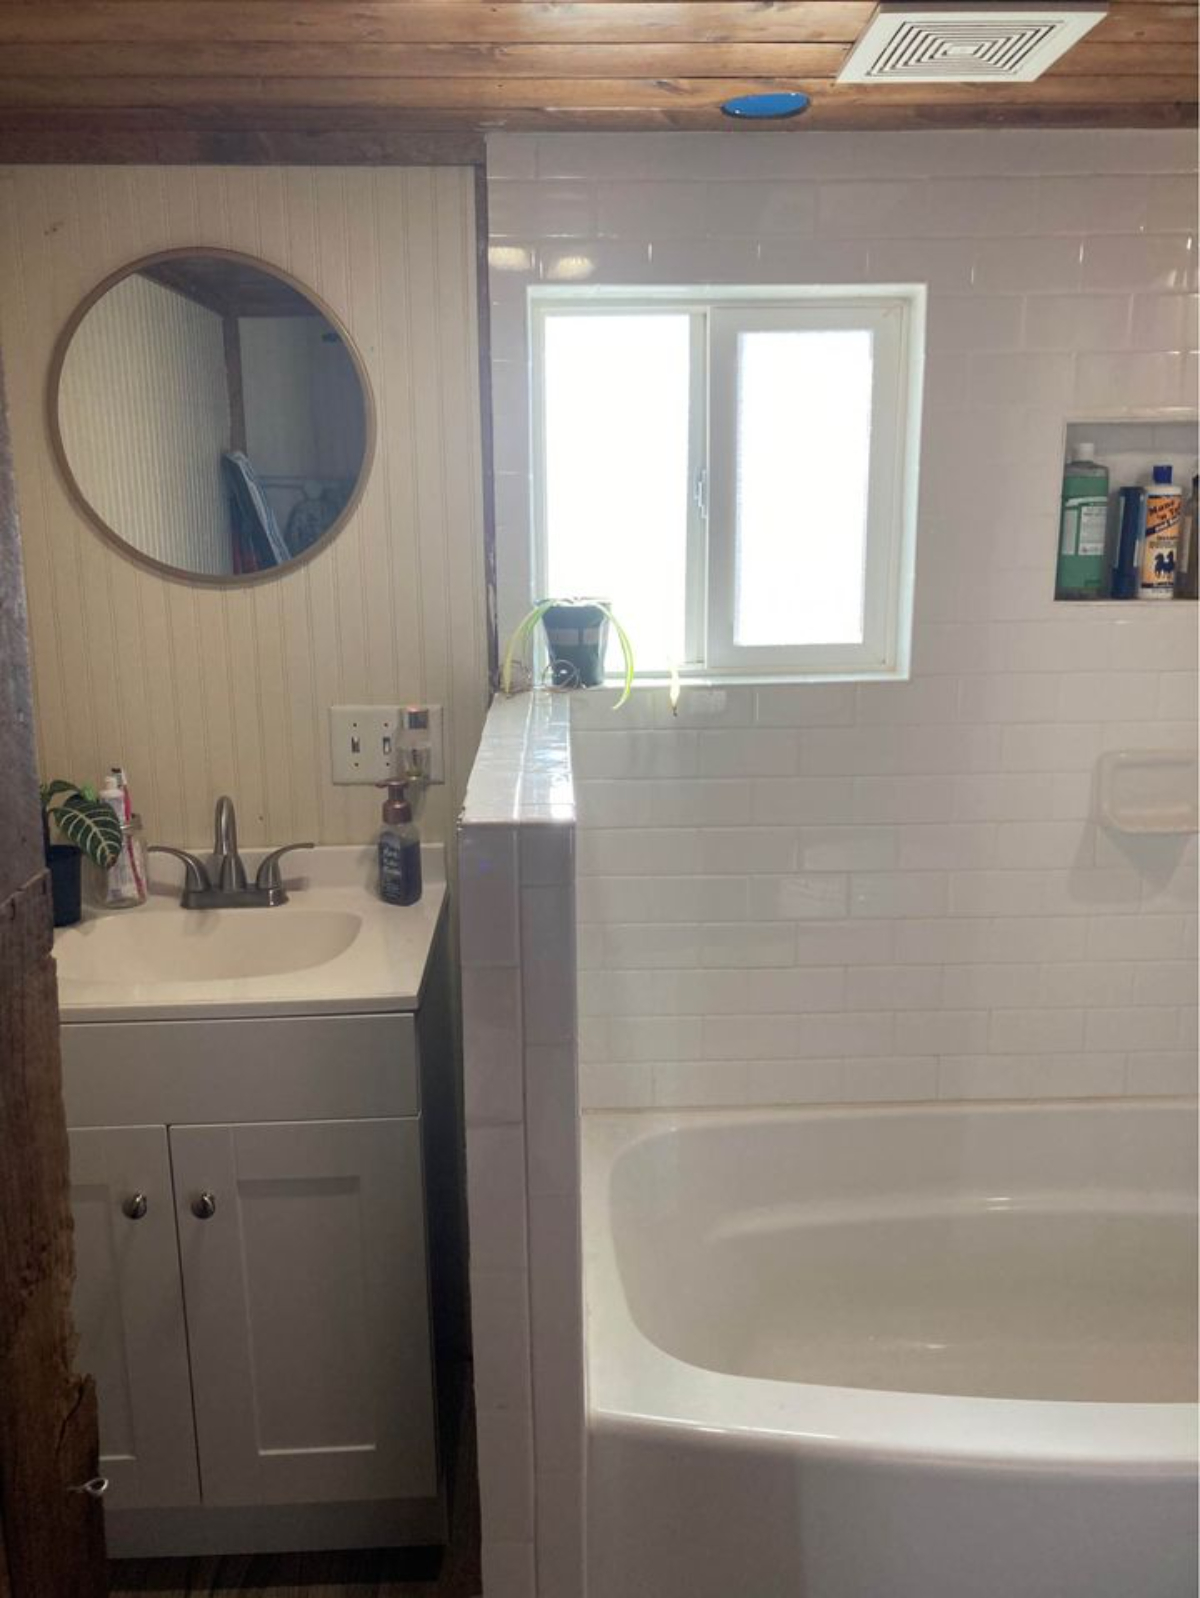 Bathroom of 30' Budget-Friendly Tiny House has a mirror & a sink with vanity